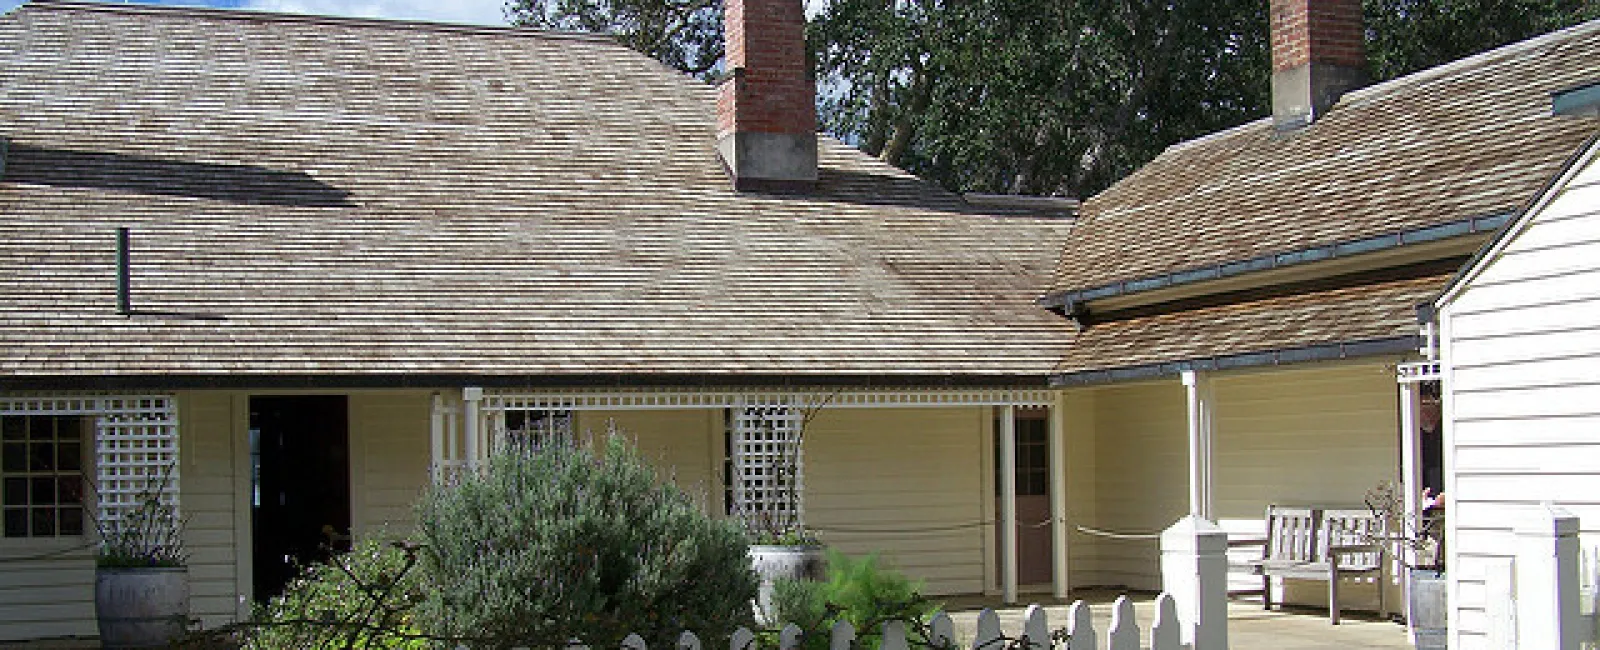 I Got a Brand New Roof: How Can I Preserve It?